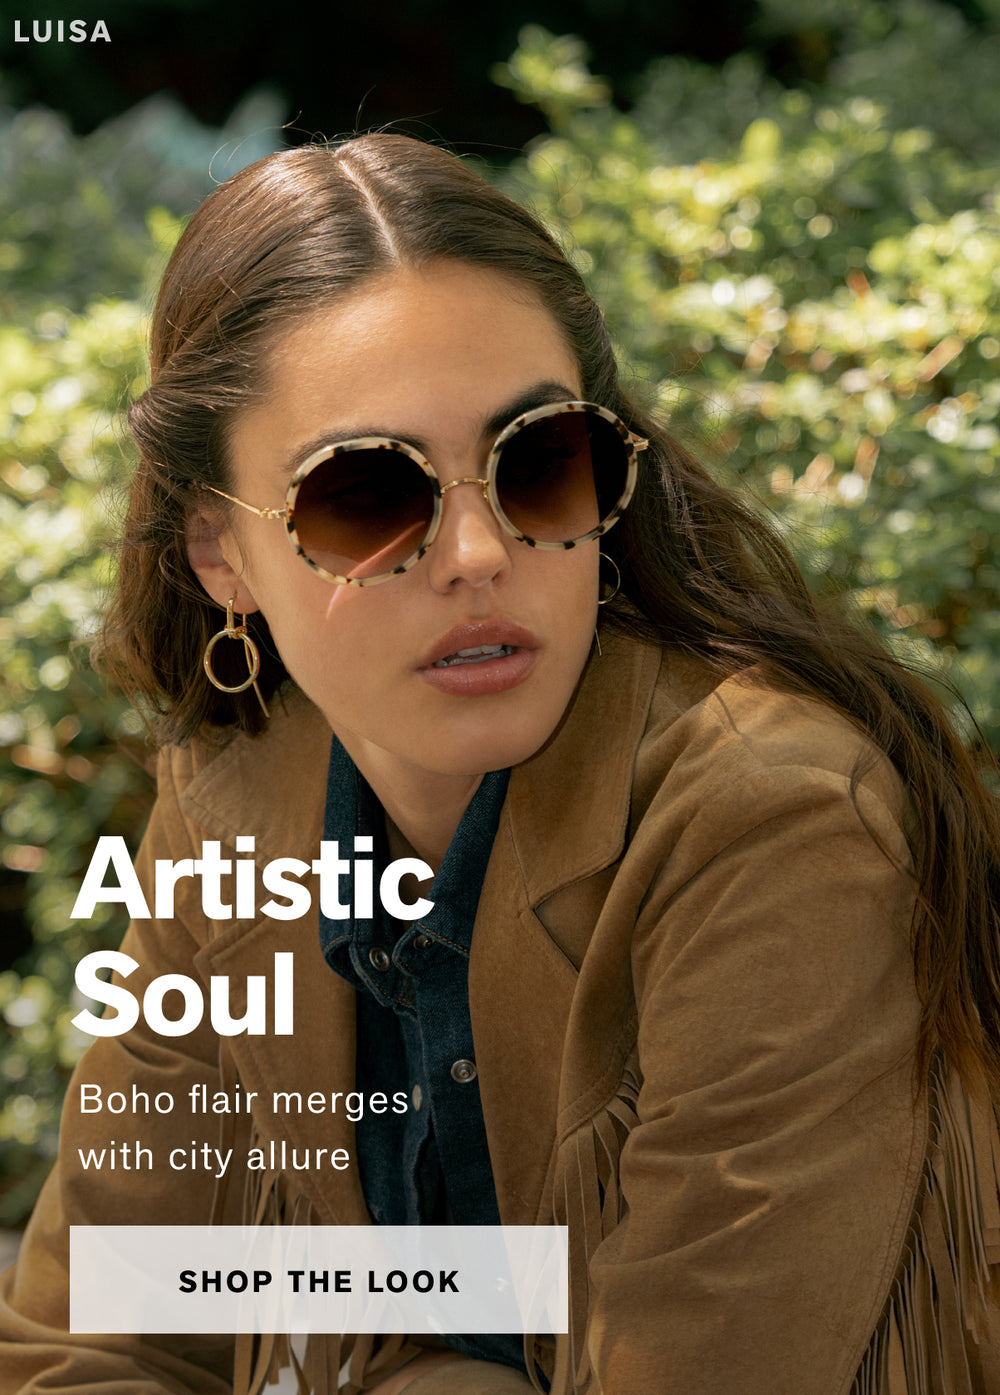 Artistic Soul  Boho flair merges with city allure   Shop the look